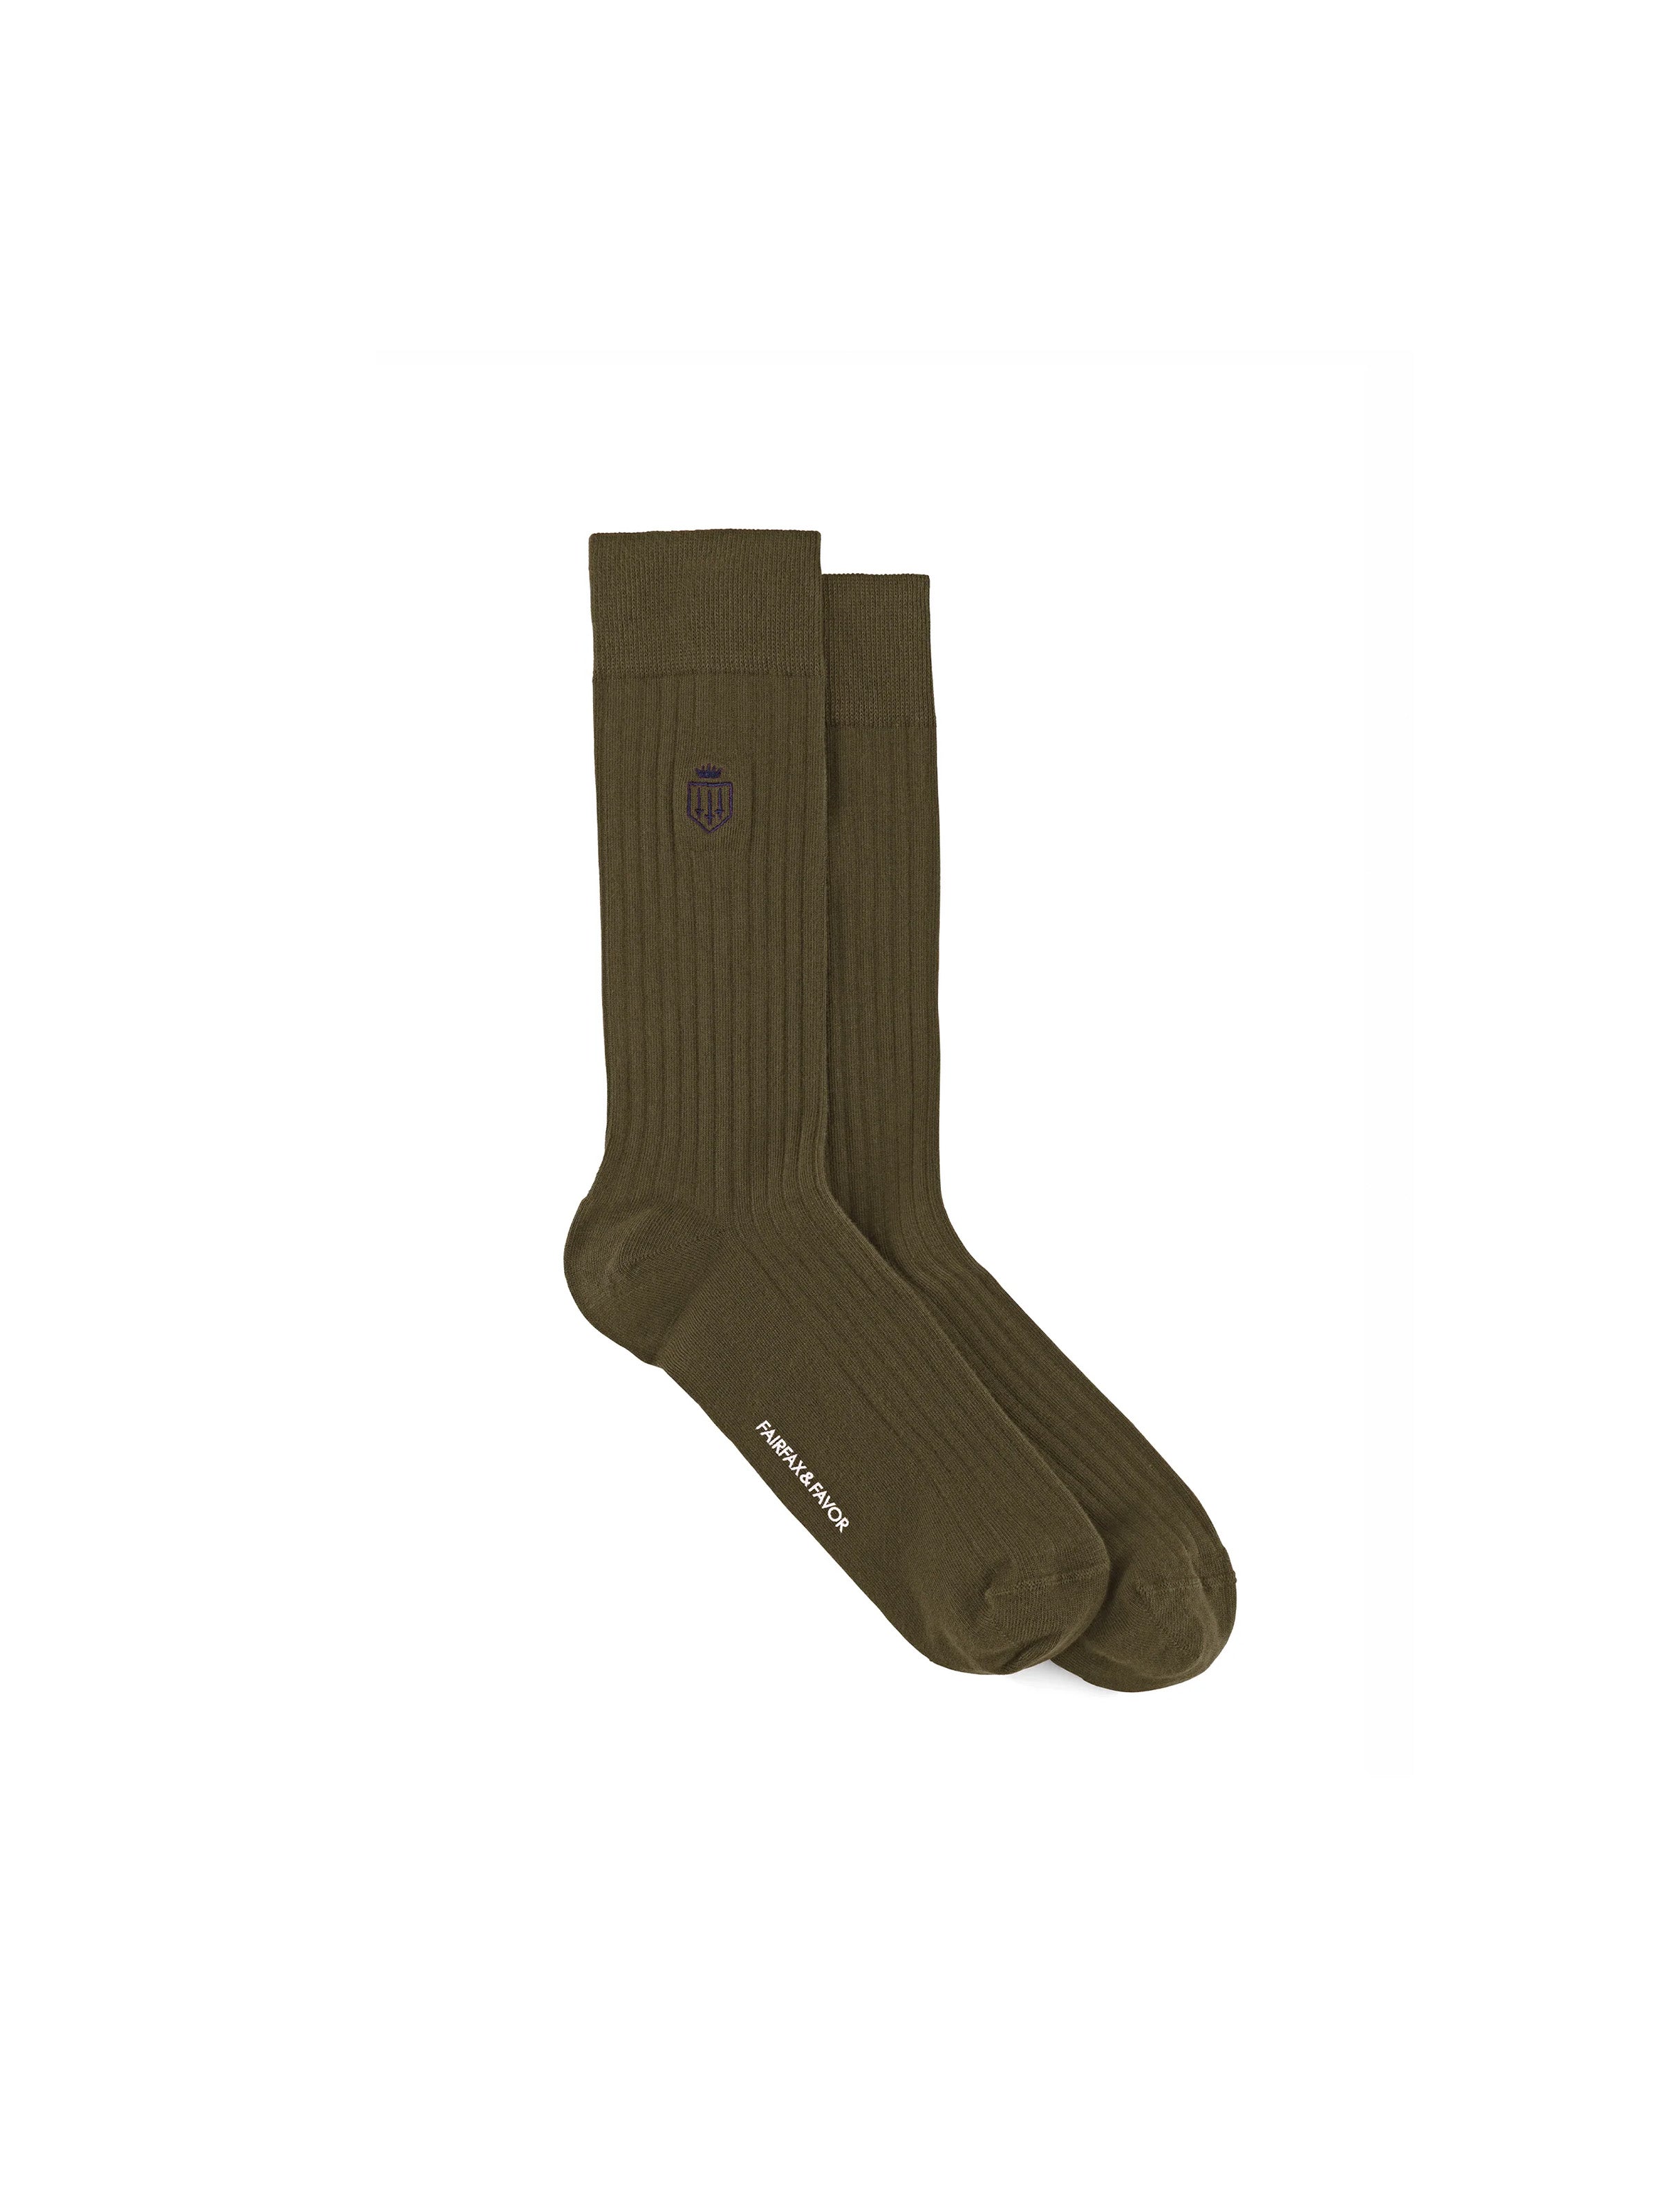 Short Wool Ribbed Dress Socks - The Ben Silver Collection